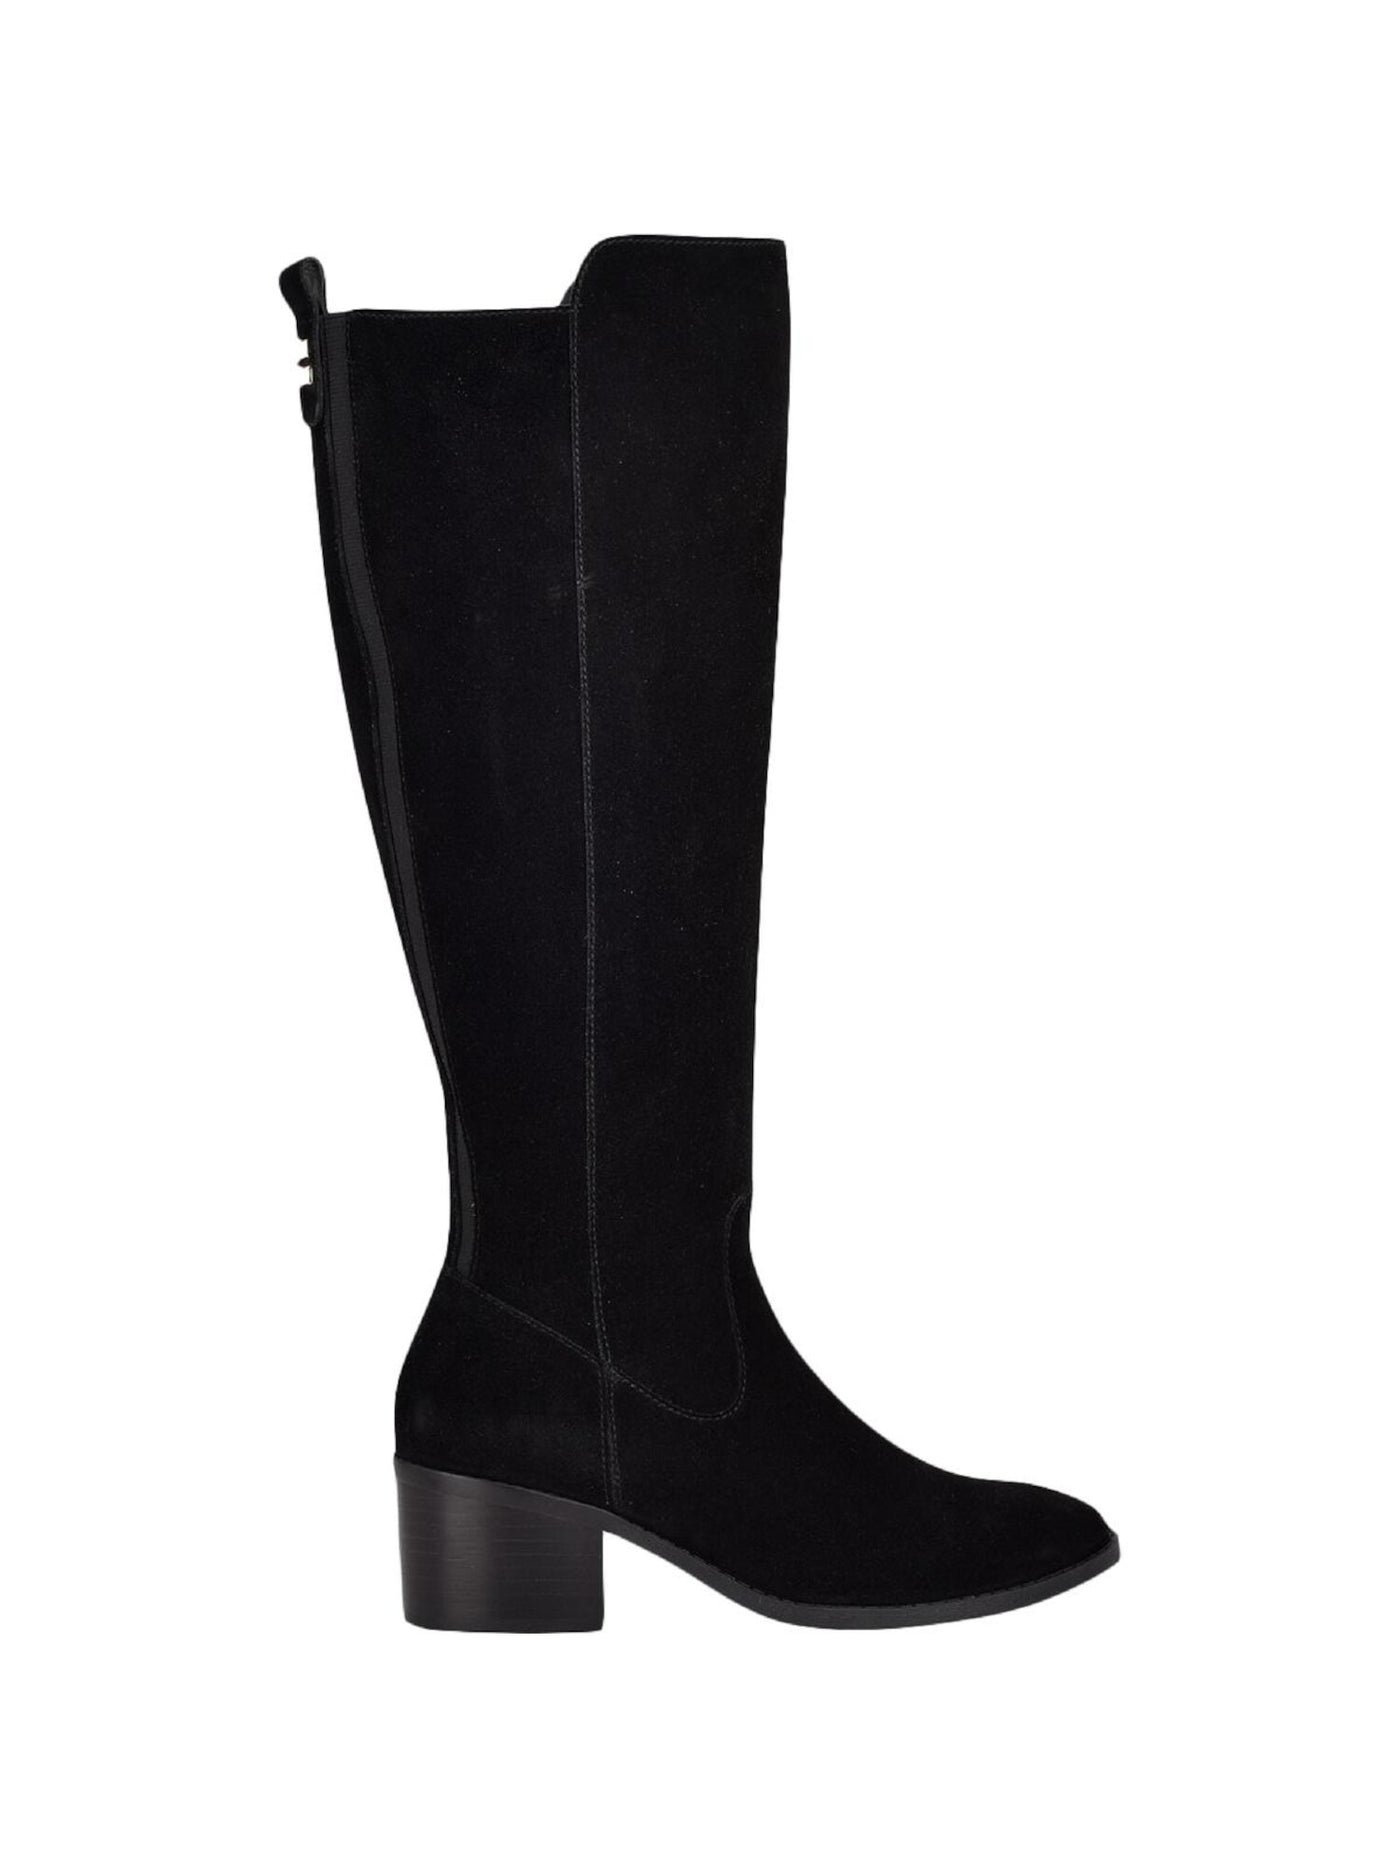 MARC FISHER Womens Black Cushioned Wide Calf Rela Almond Toe Block Heel Zip-Up Leather Riding Boot 6.5